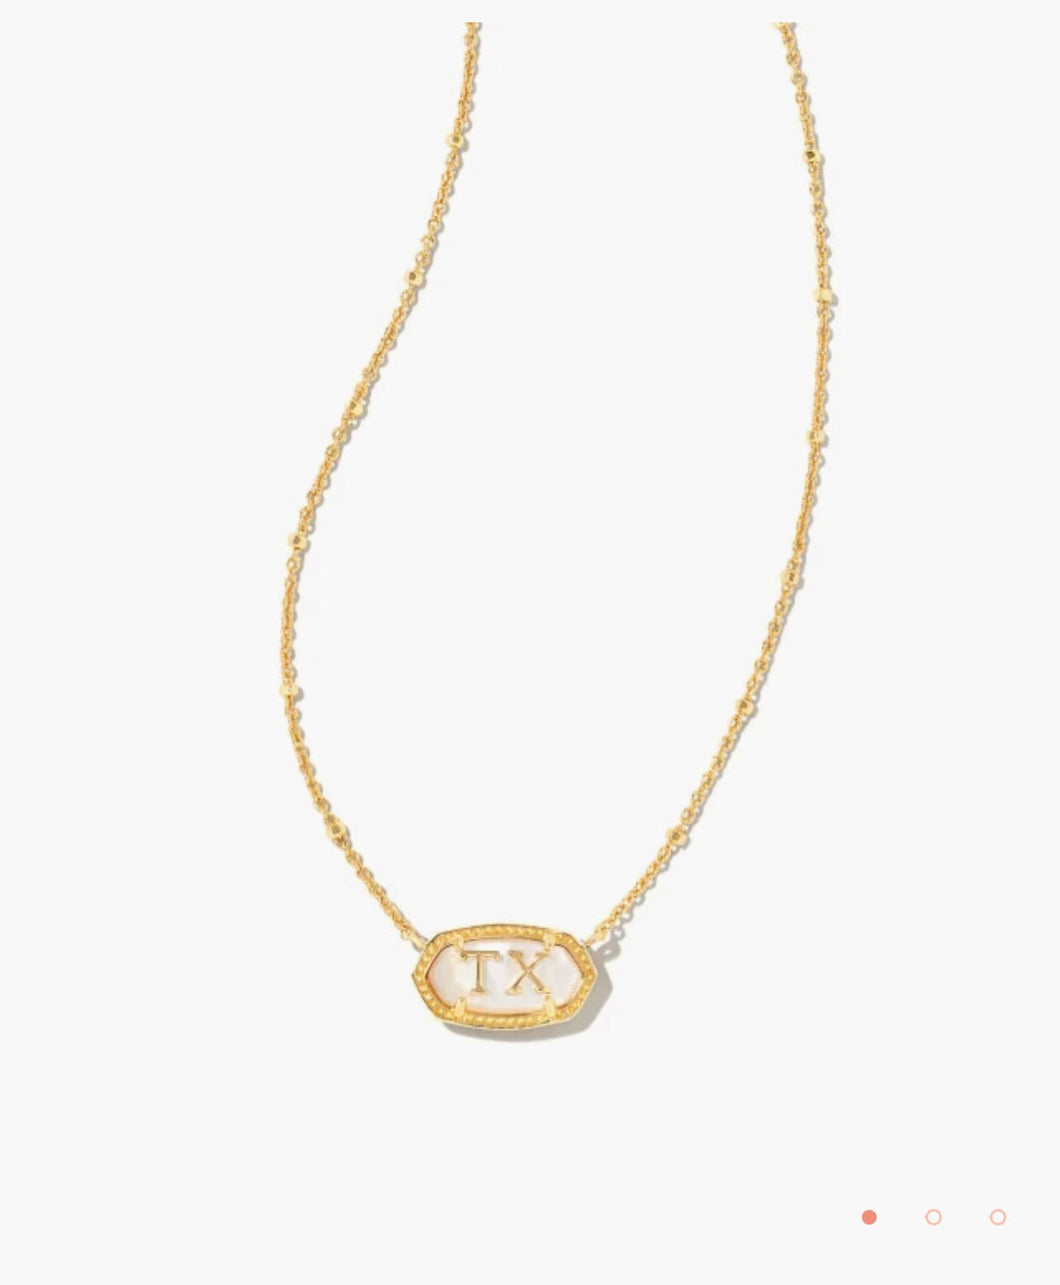 Kendra Scott-Elisa Gold Texas Necklace in Ivory Mother-of-Pearl 9608852651